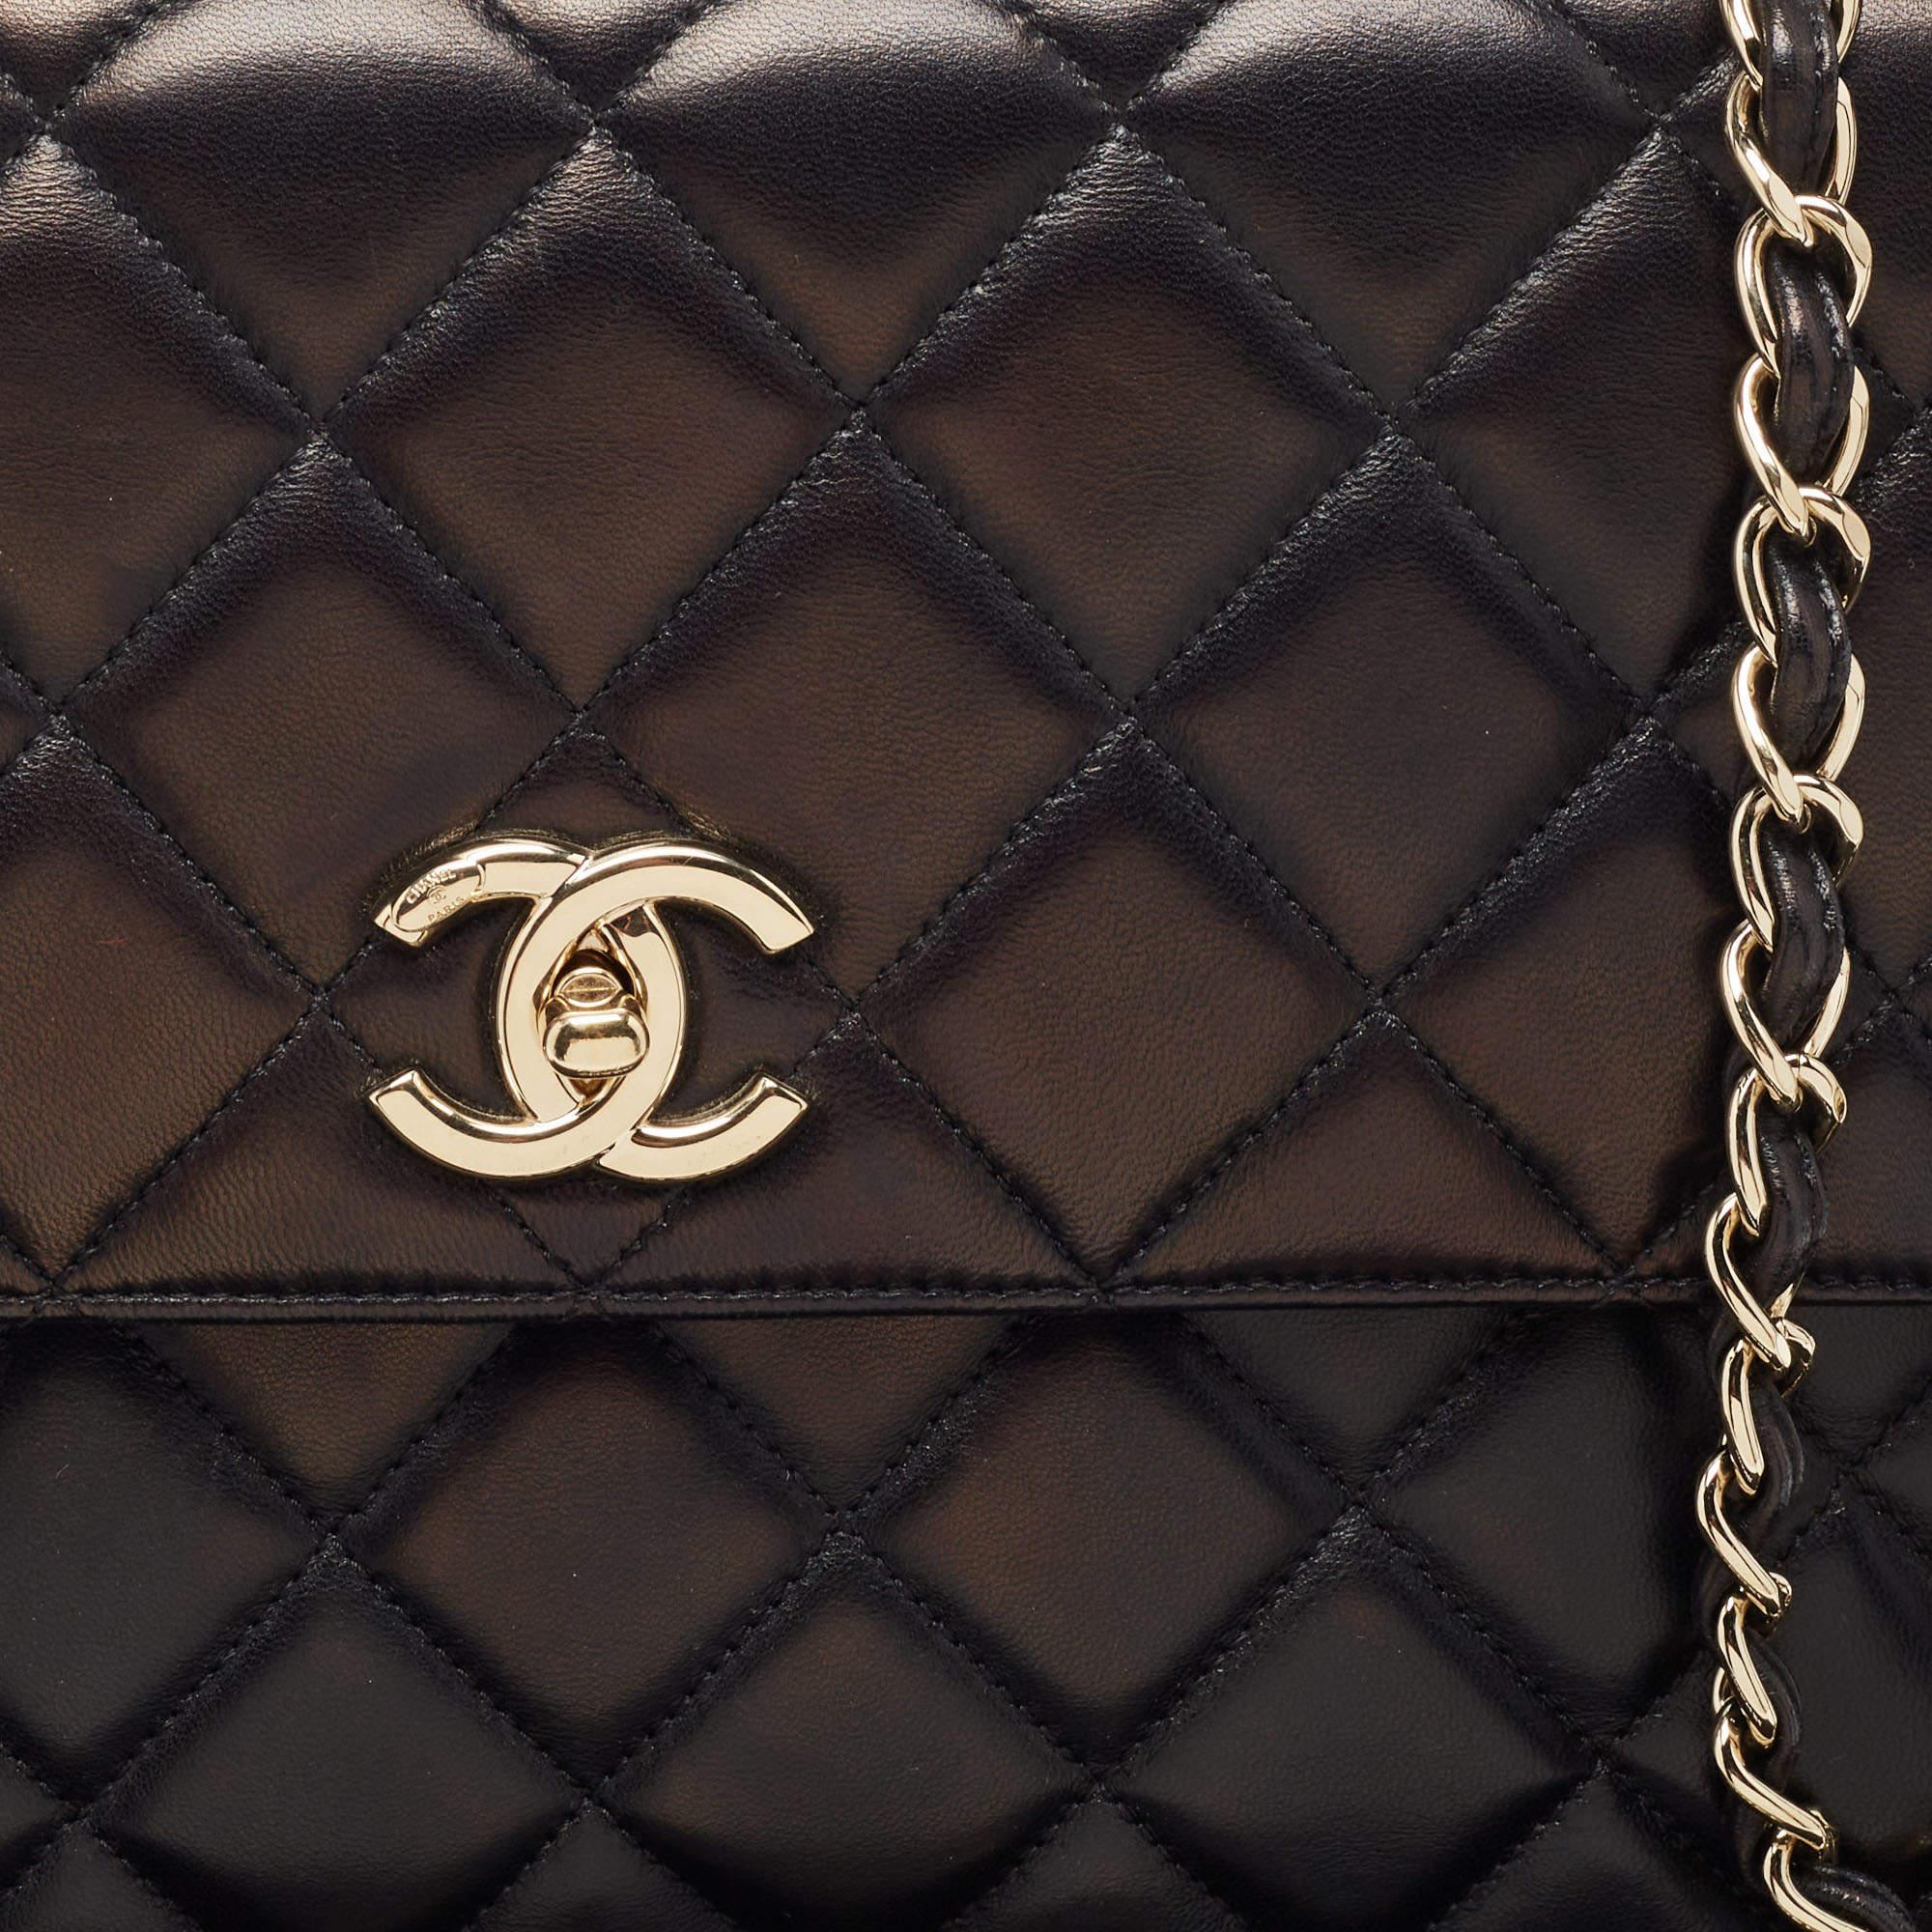 Chanel Black Quilted Leather Large Trendy CC Top Handle Bag 10